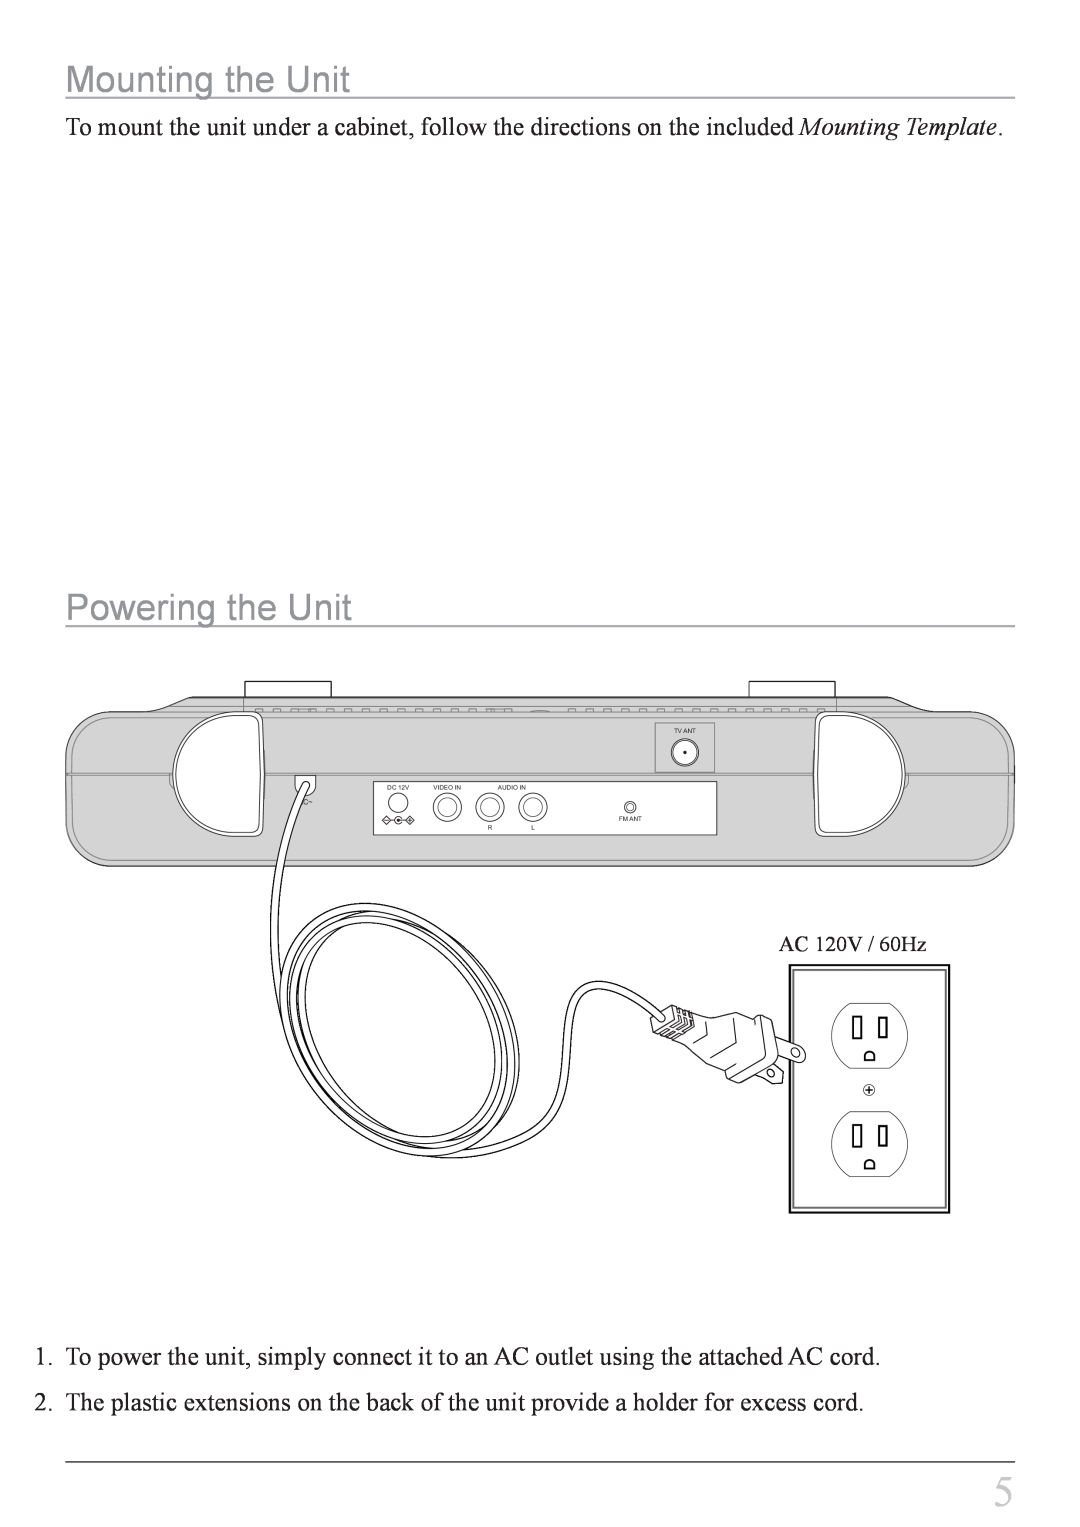 GPX KCL8807DT instruction manual Mounting the Unit, Powering the Unit, AC 120V / 60Hz 